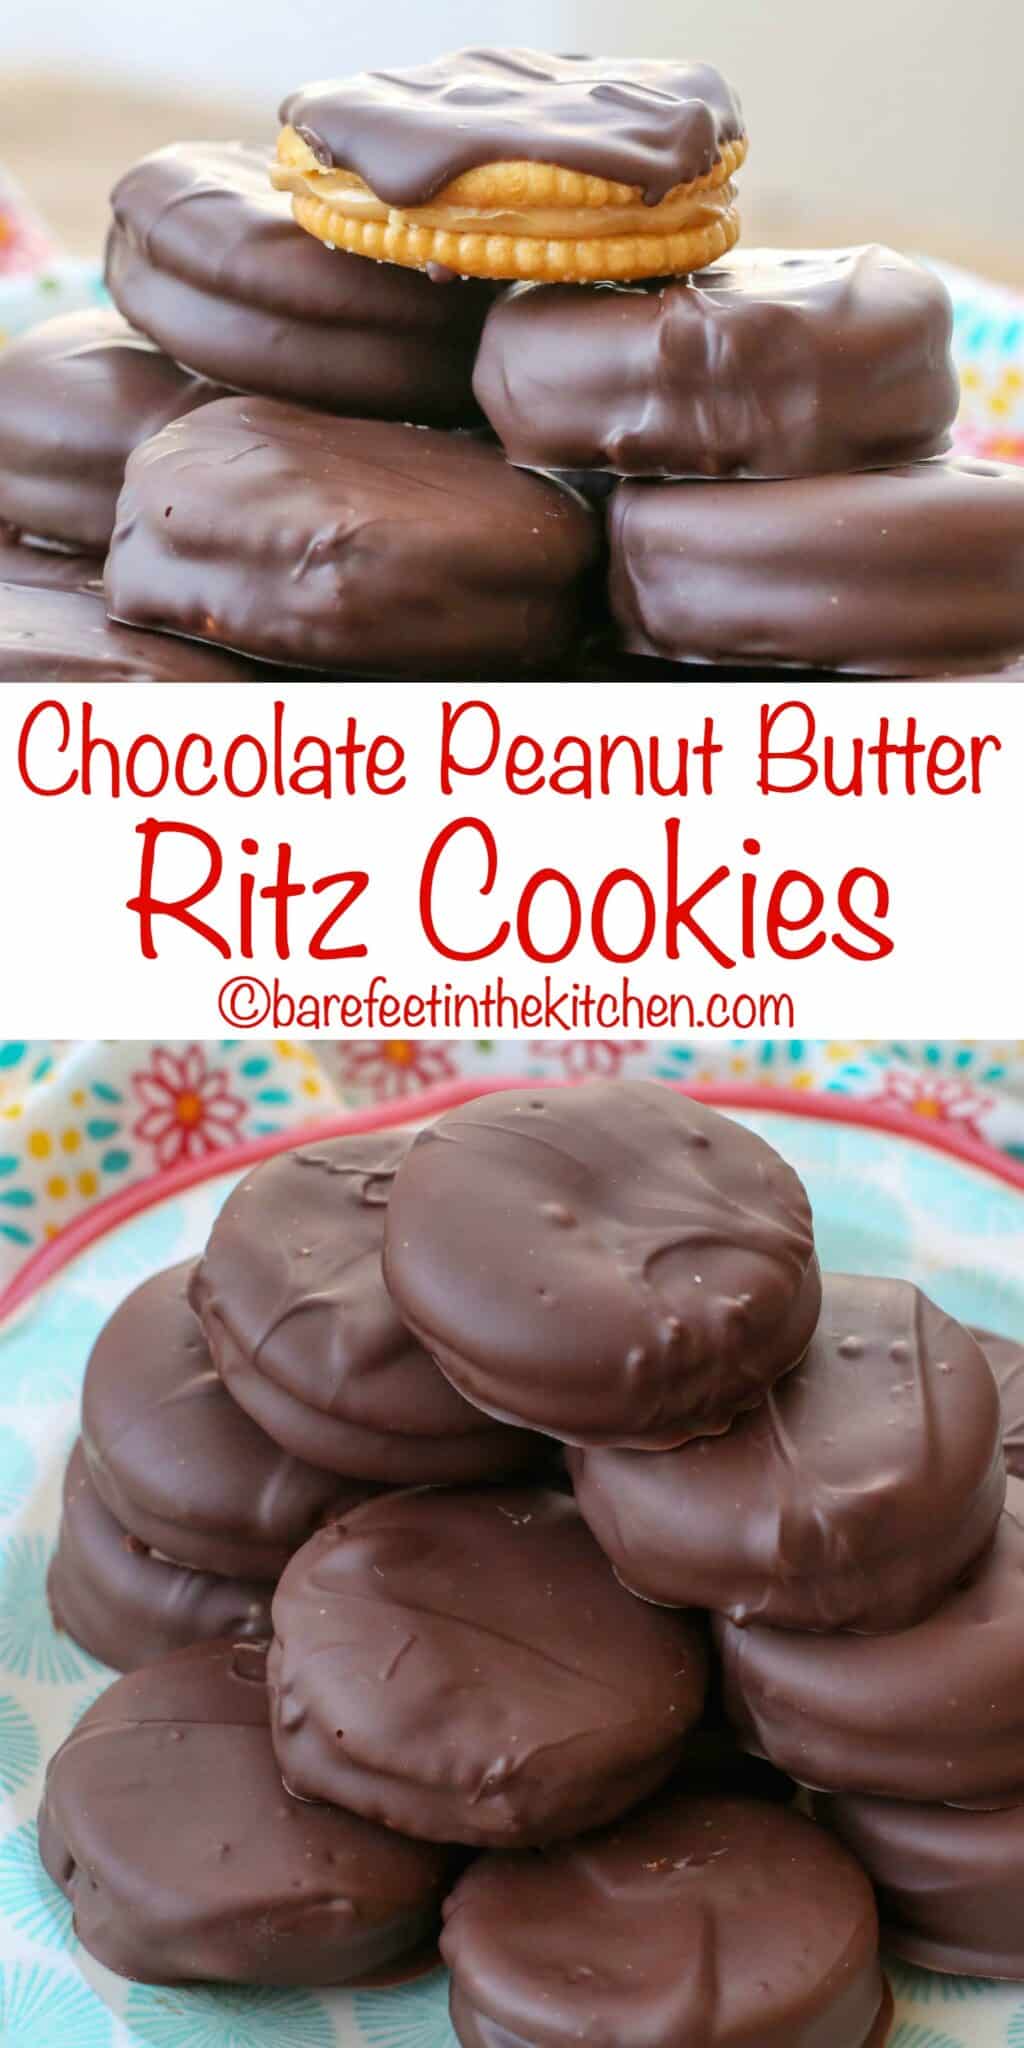 Chocolate Peanut Butter Ritz Cookies - Barefeet in the Kitchen